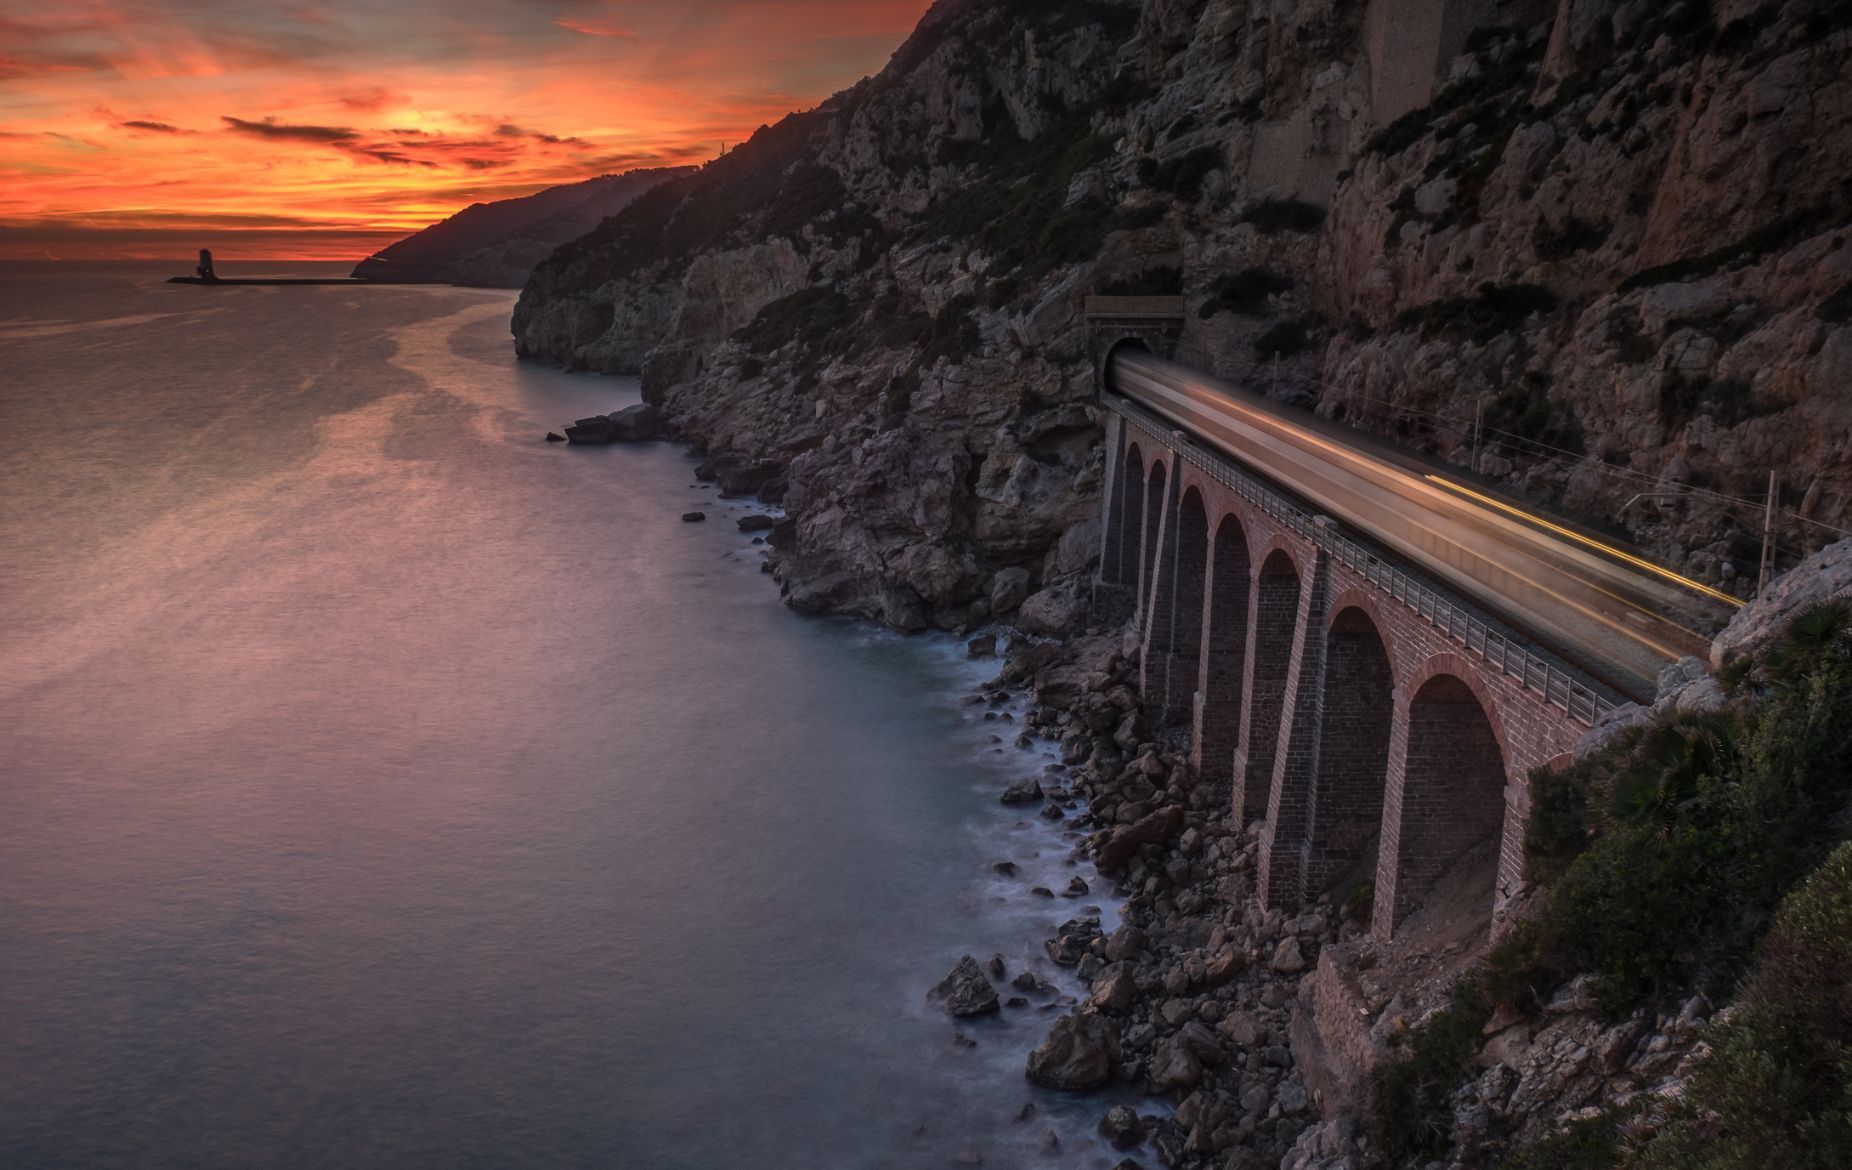 Sunset on the shores of the Garraf, of the province of Barcelona, with a train passing through a bridge along sea cliffs. Photo: Getty